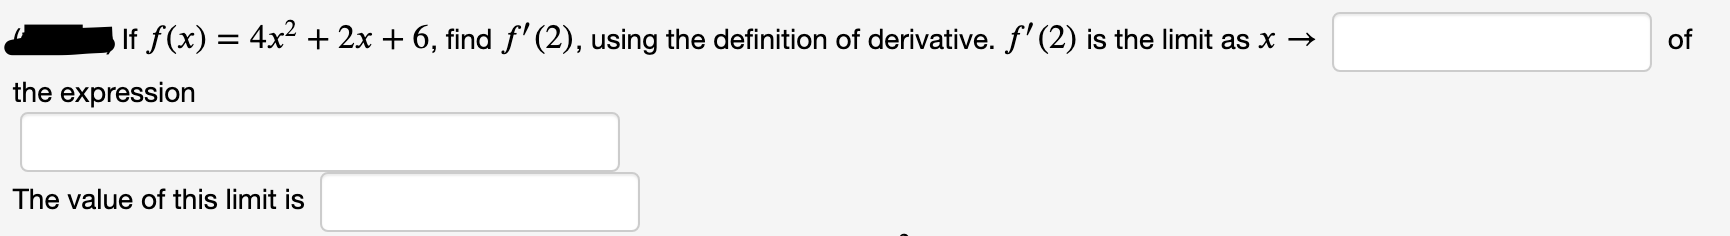 If f(x) = 4x + 2x + 6, find f' (2), using the definition of derivative. f' (2) is the limit as x →
of
the expression
The value of this limit is
